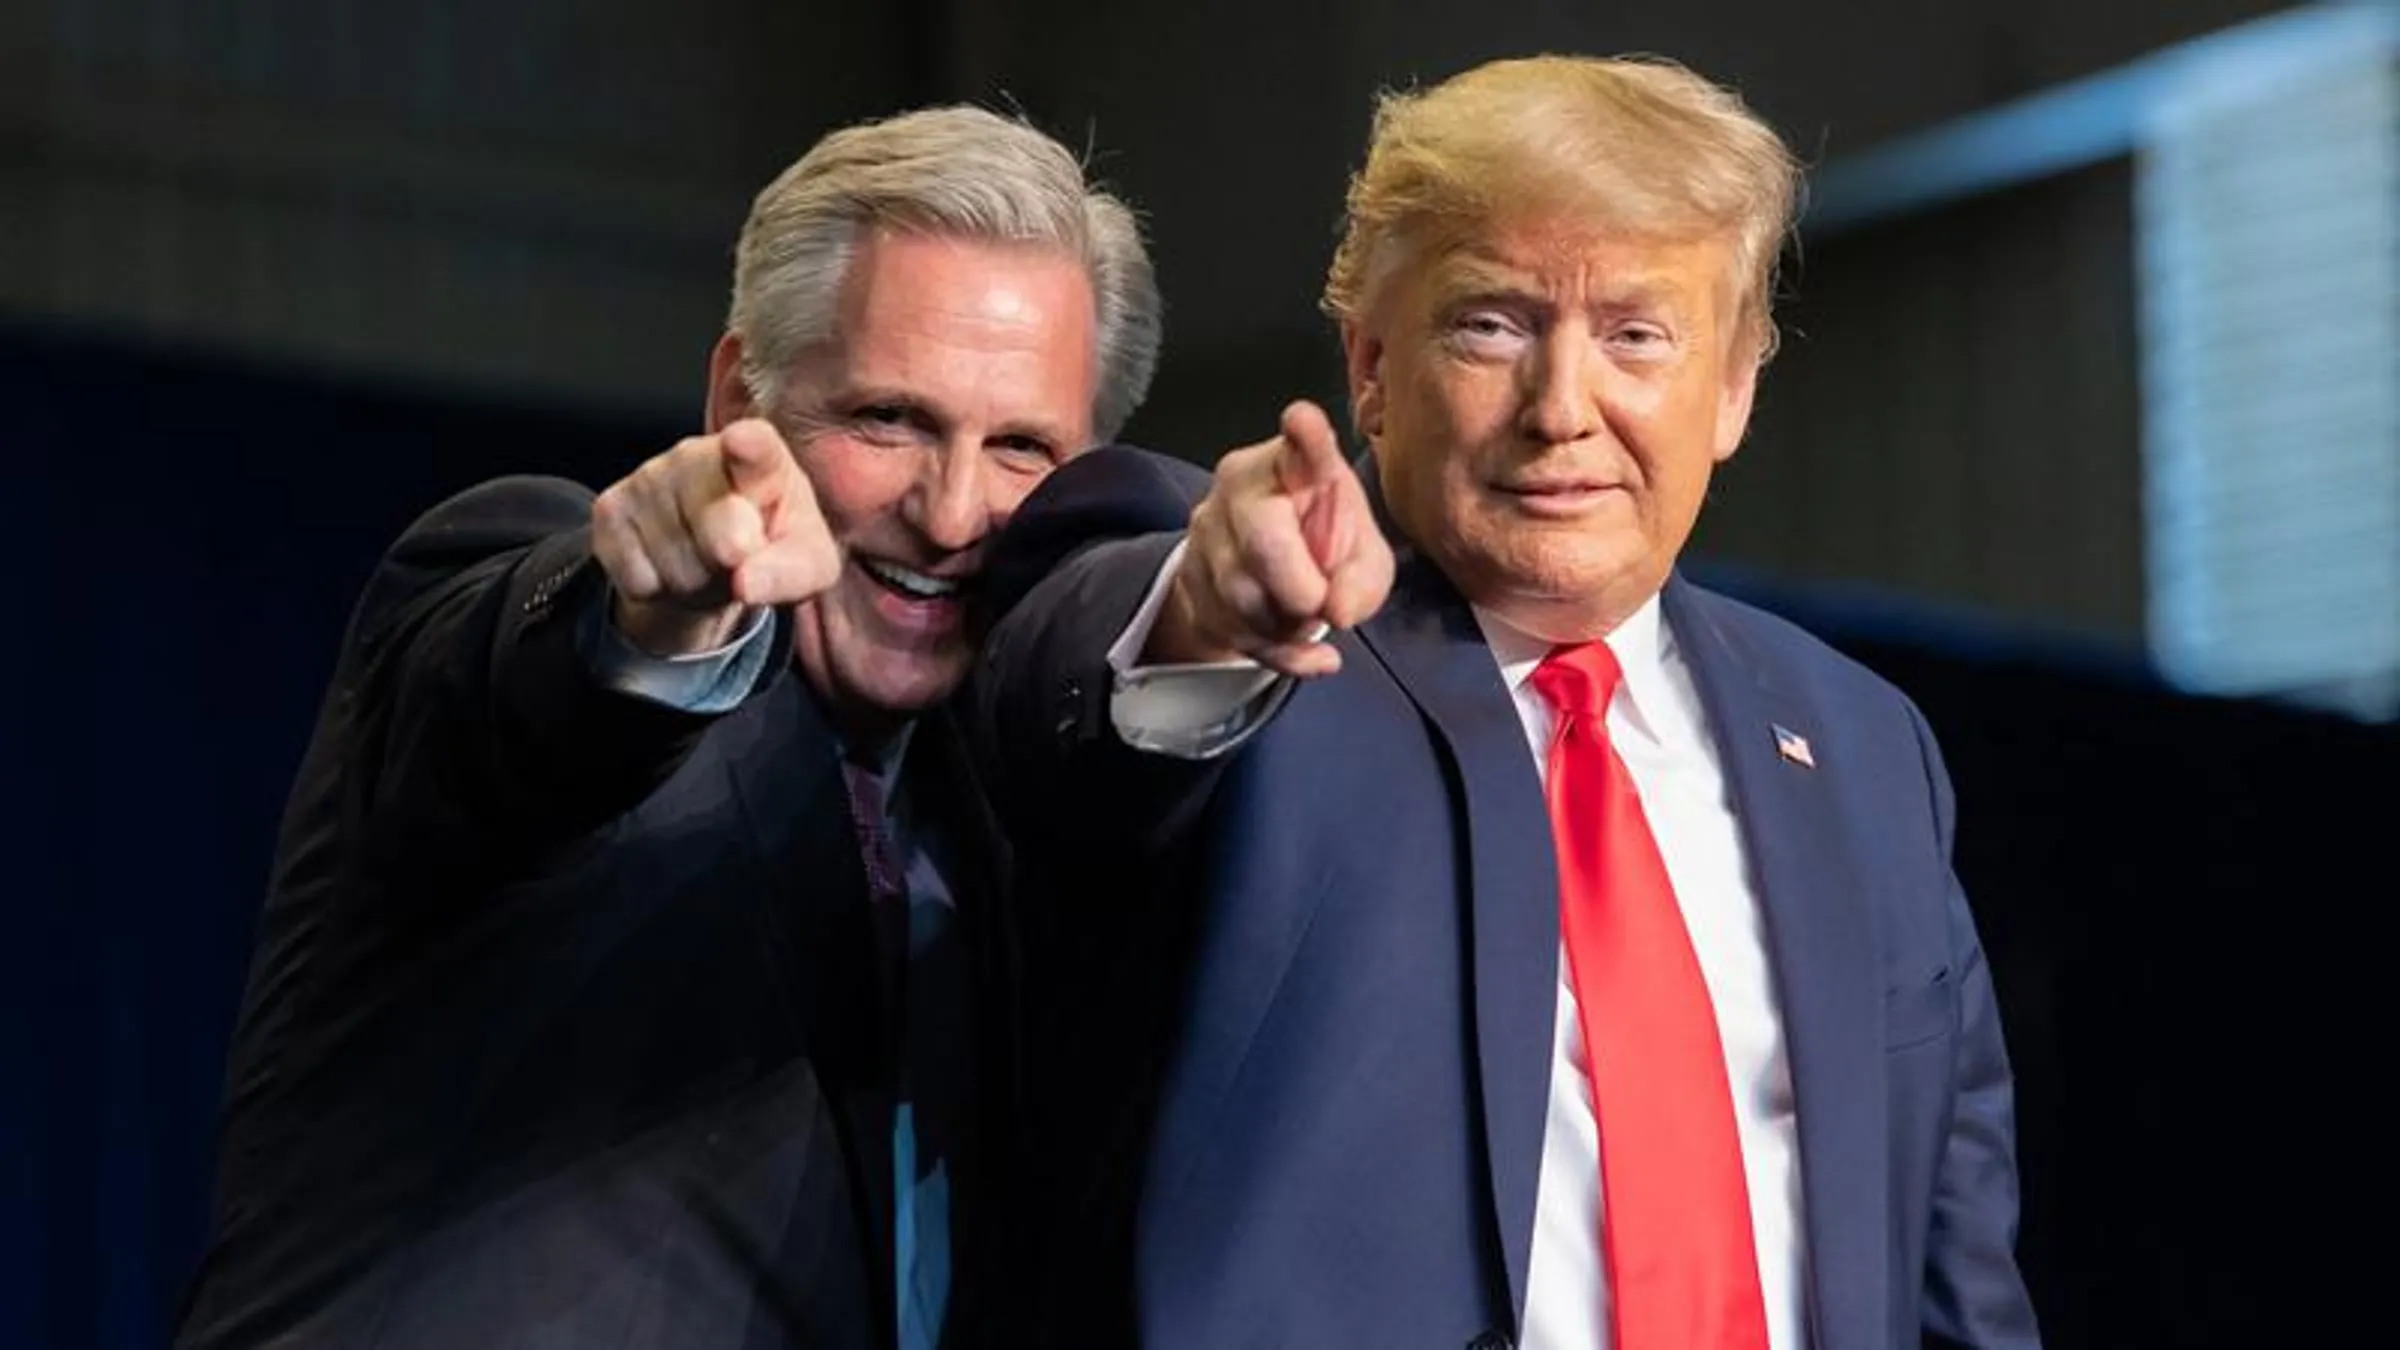 McCarthy is one of Trump’s ‘goons’ and Trump is behind the debt ceiling disaster: strategist